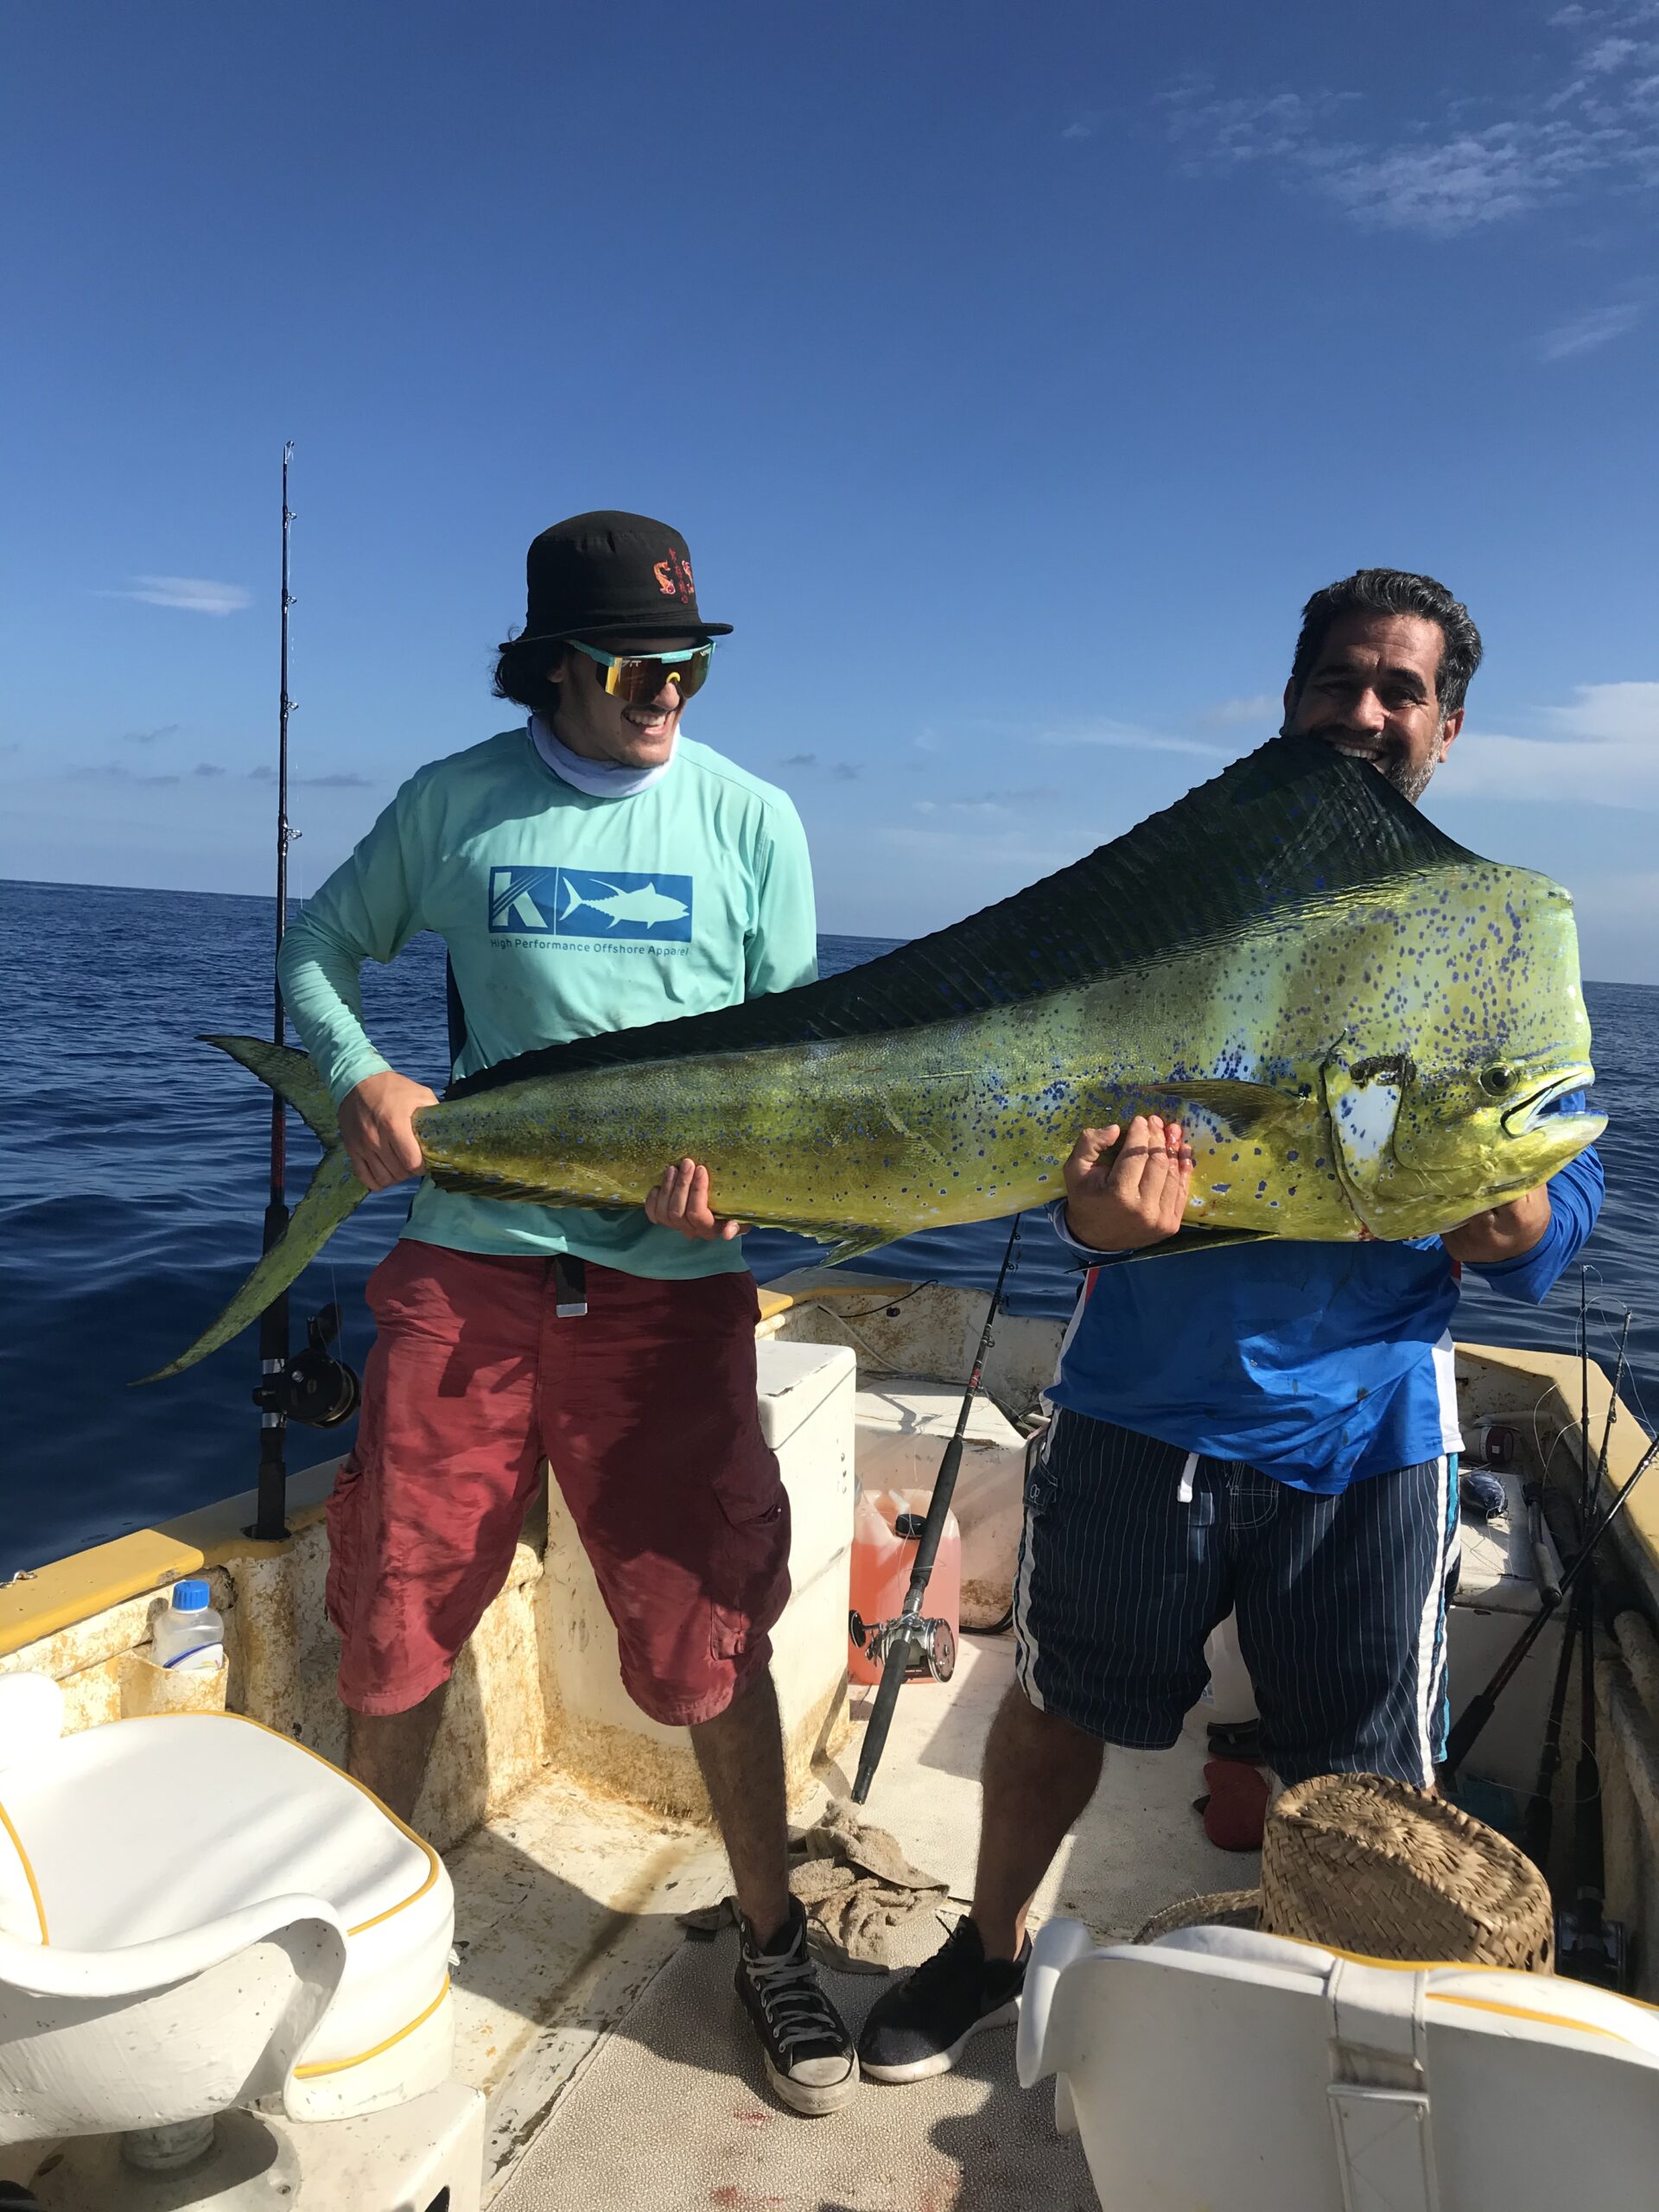 Luis Perez and his father hold a large fish they just caught while deep sea fishing